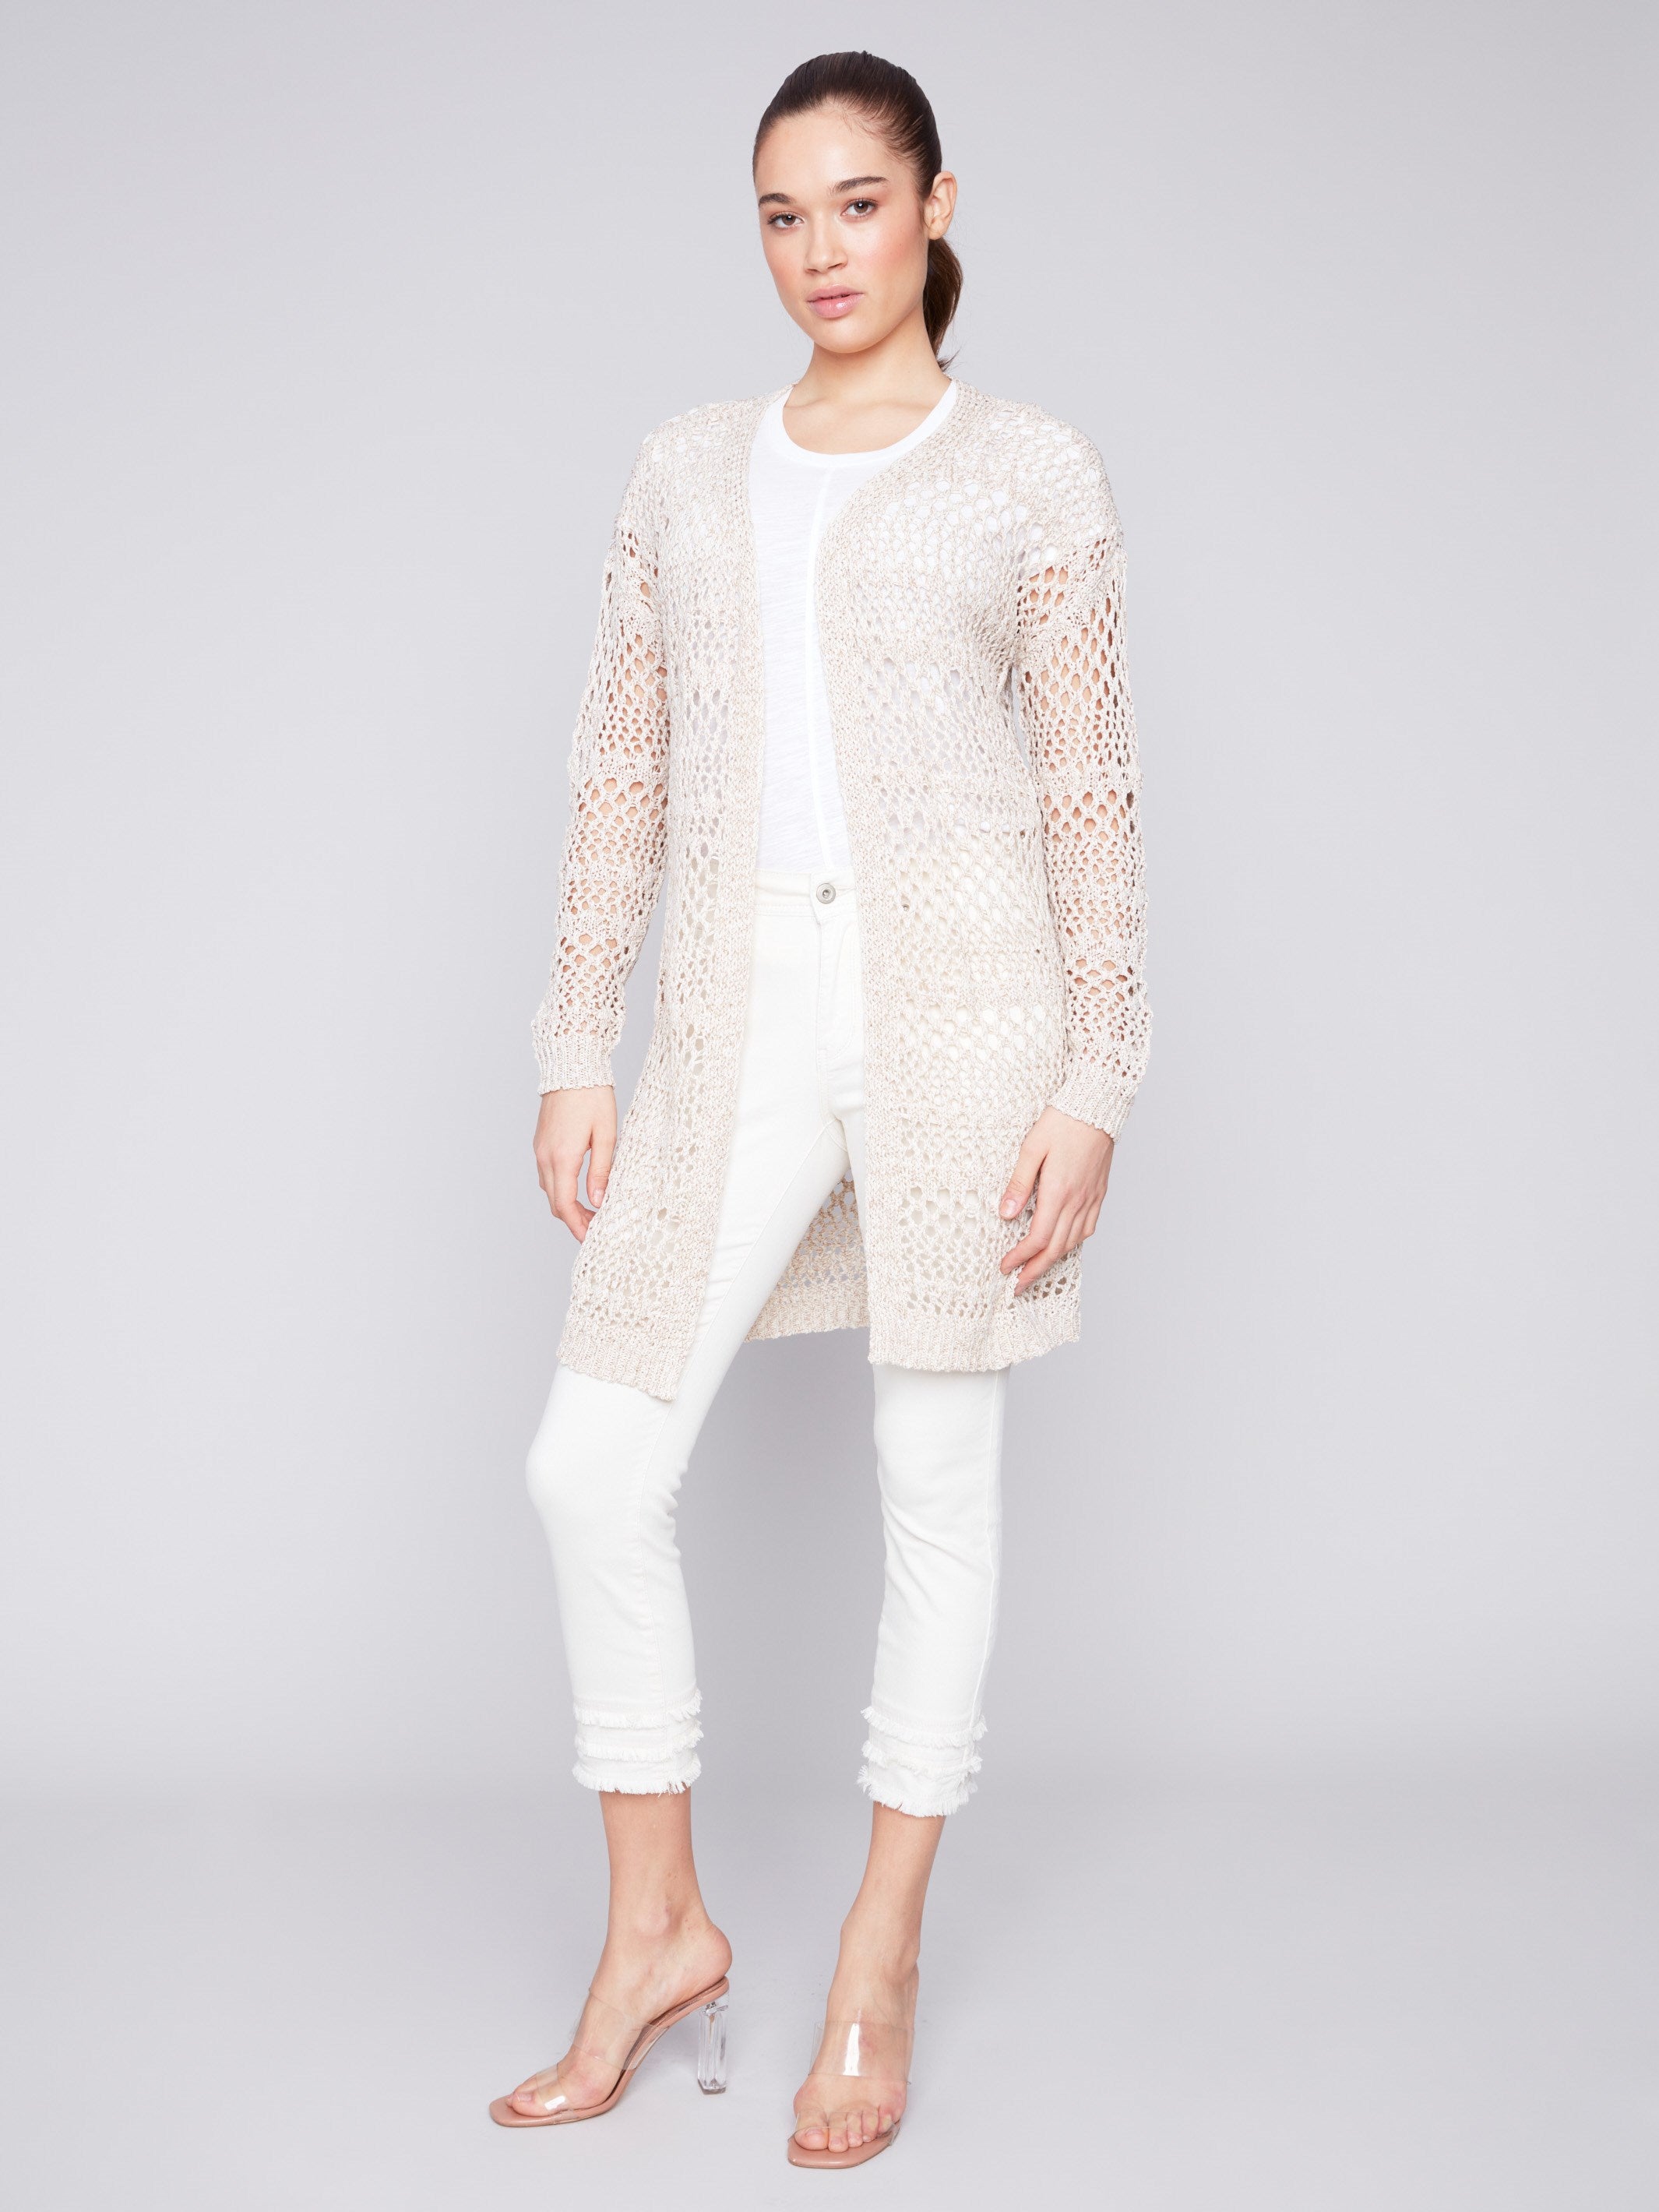 Long Knit Crochet Cardigan - Beige - Charlie B Collection Canada - Image 3